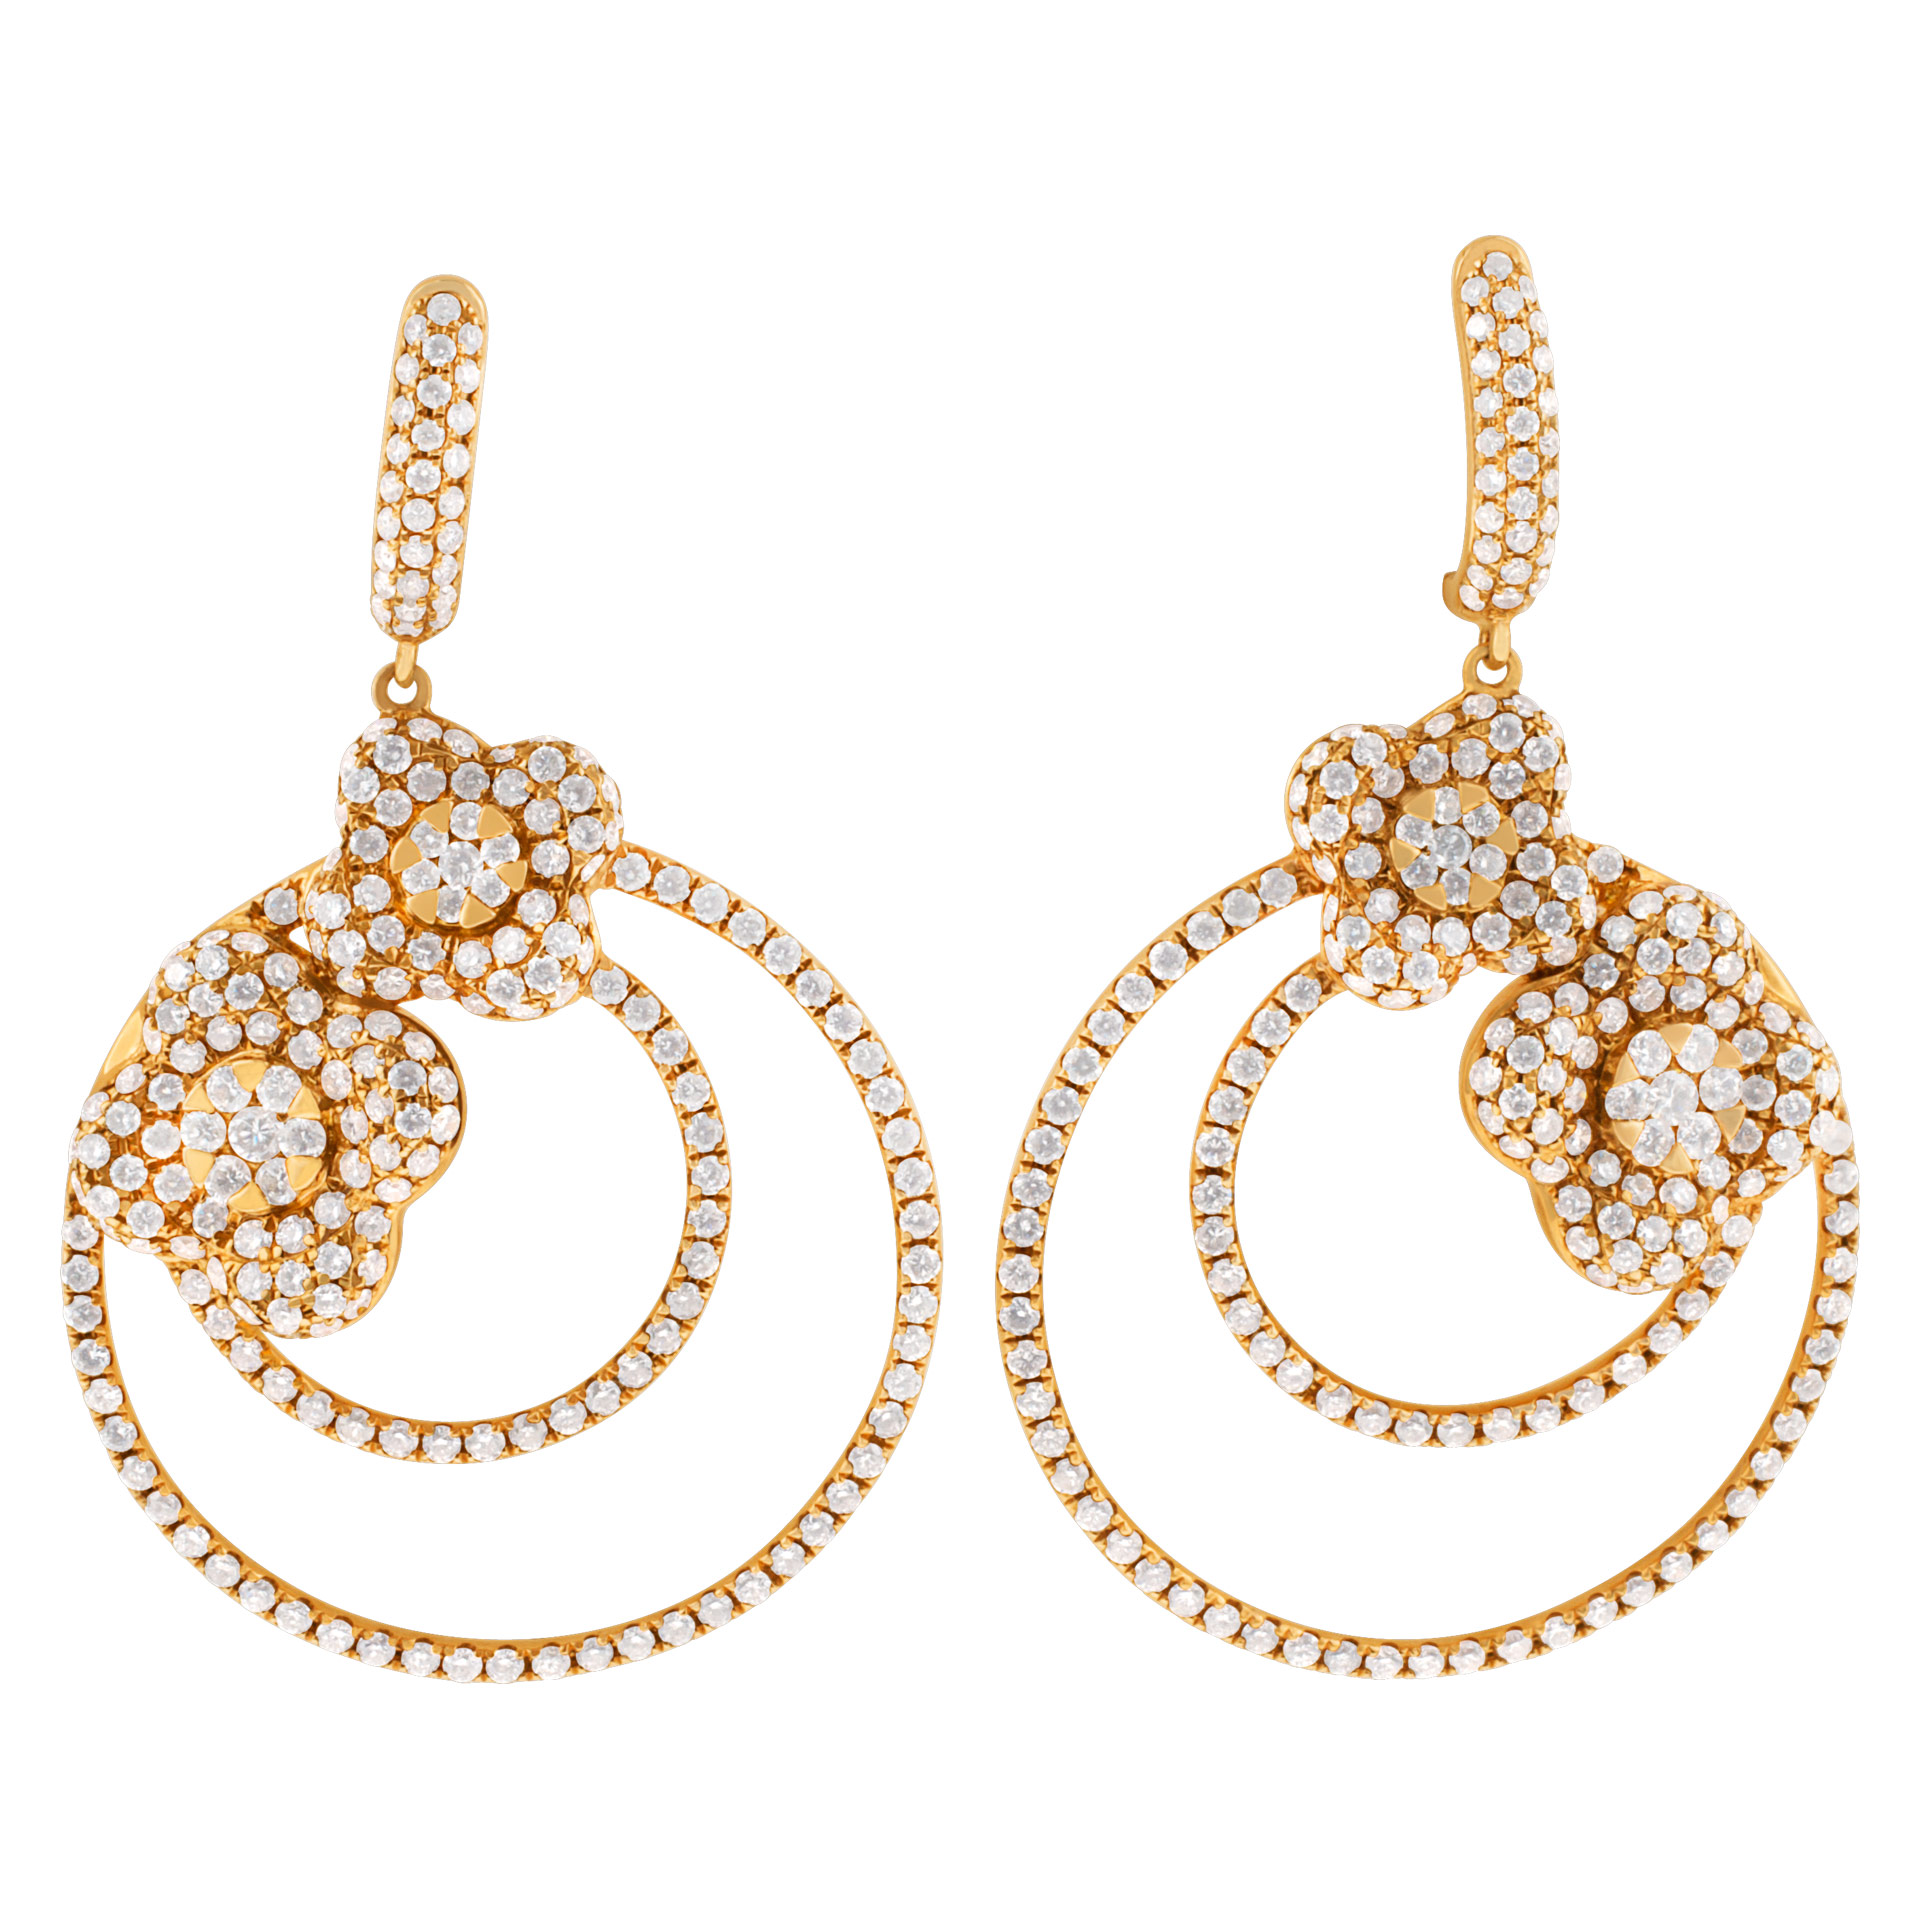 Glamorous drop diamond earrings in 18K rose gold with approx. 5.71 carats